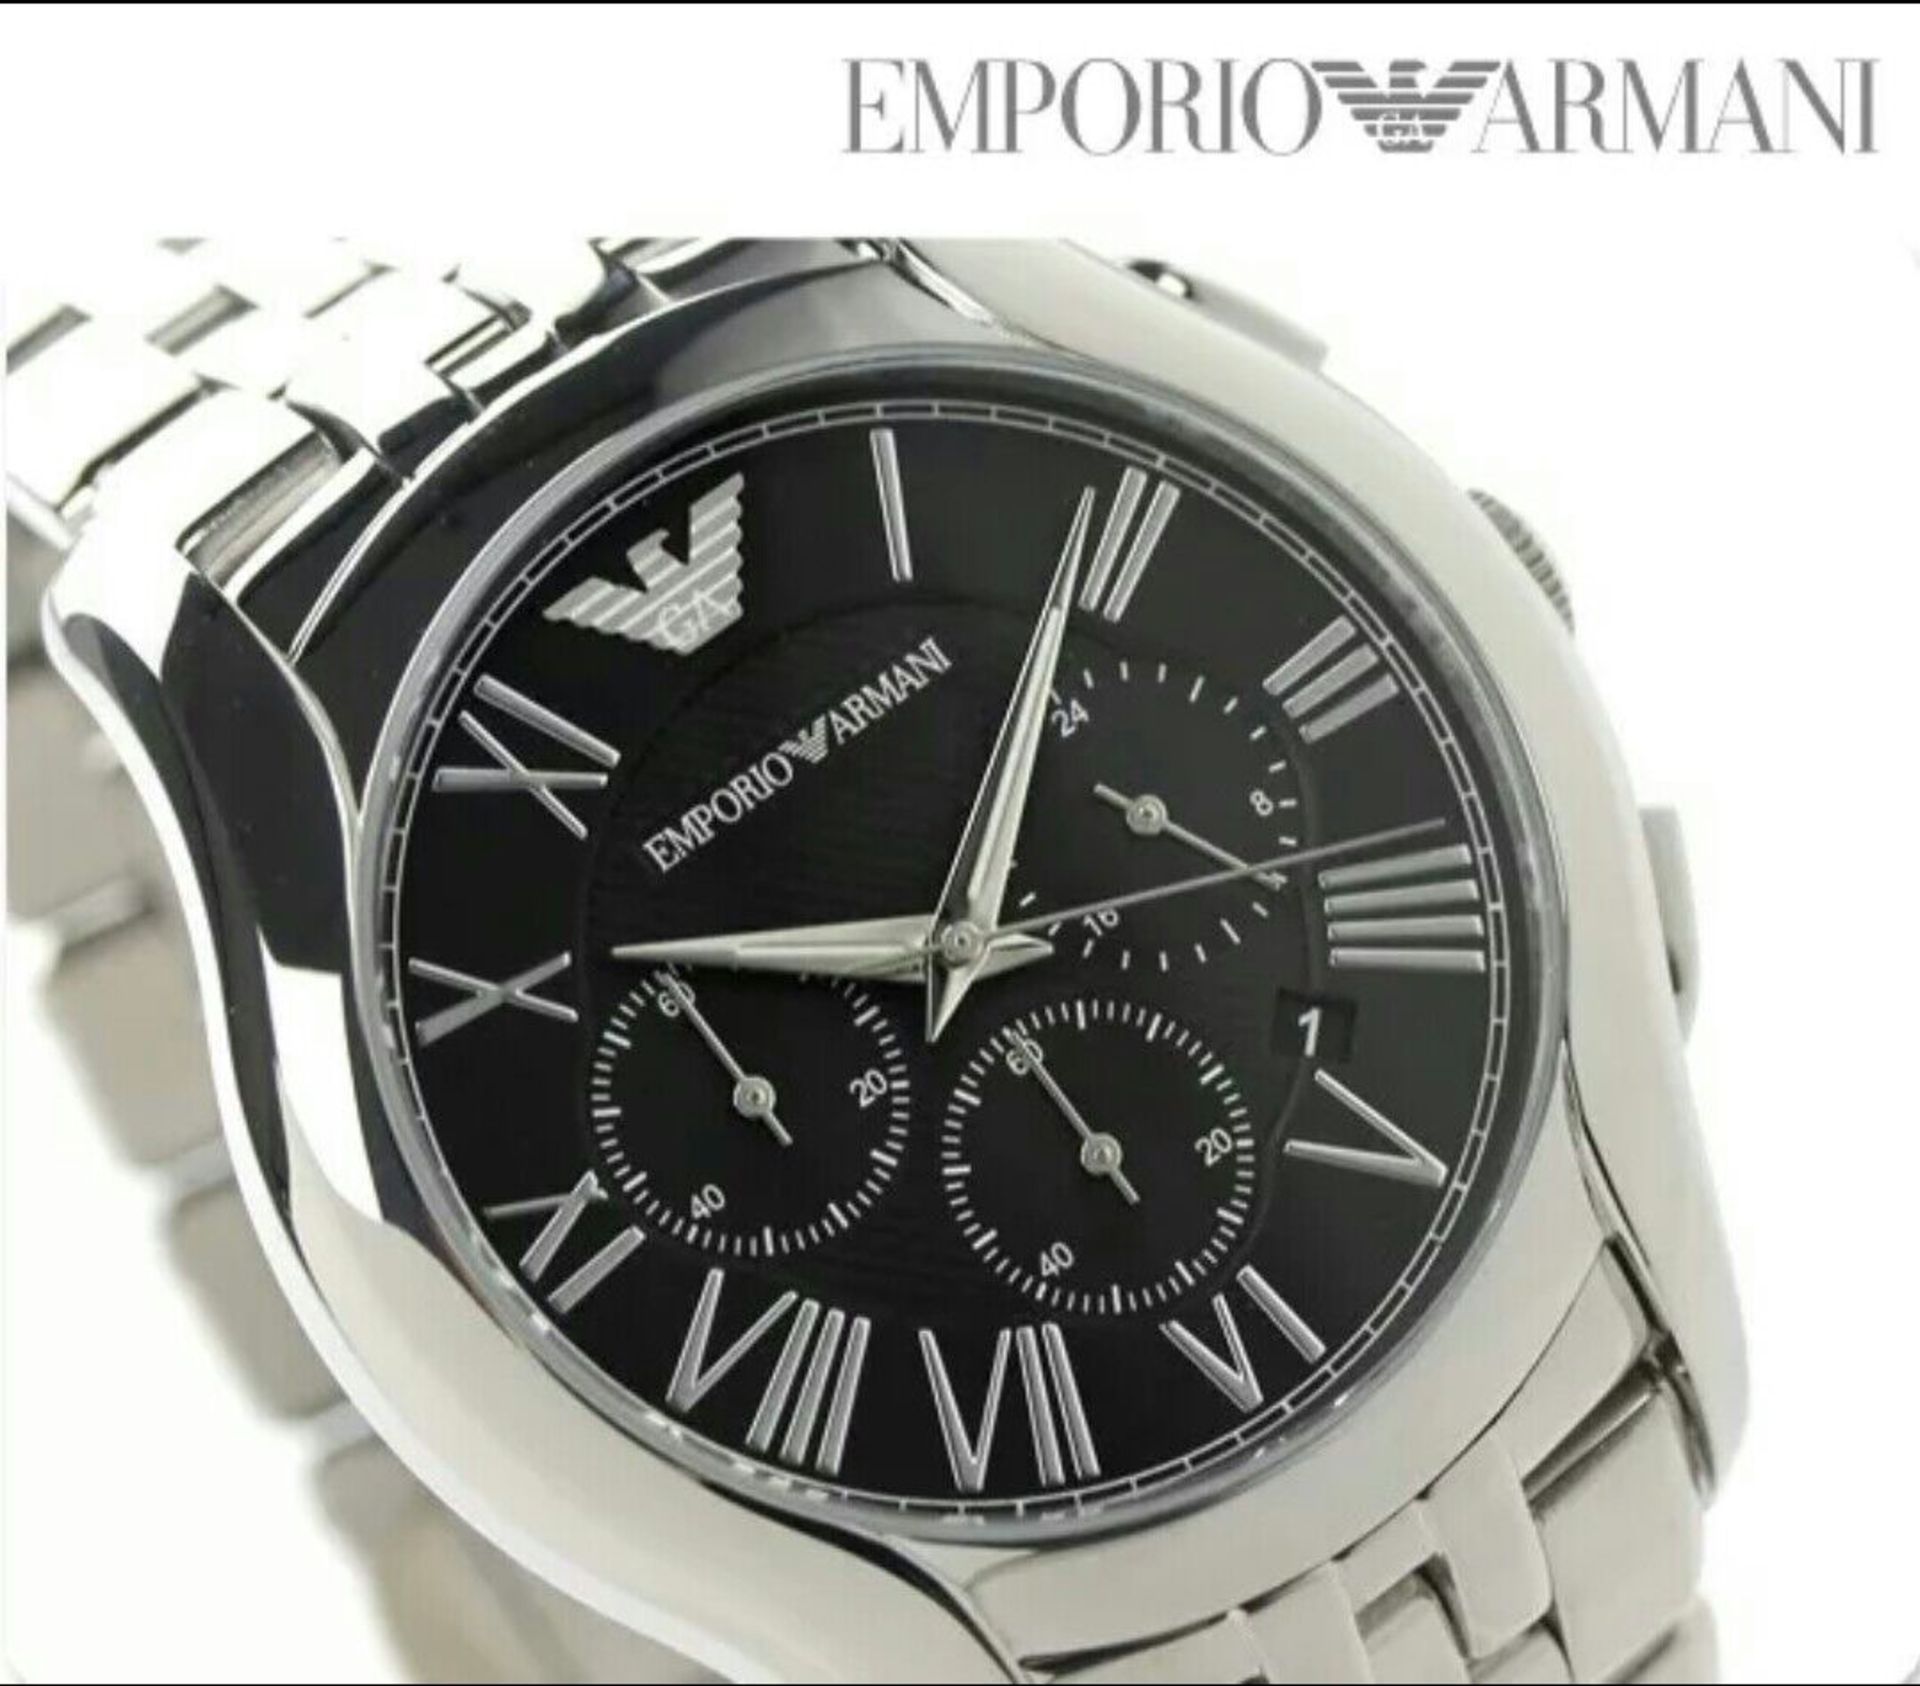 10 X BRAND NEW EMPORIO ARMANI DESIGNER WATCHES, COMPLETE WITH ORIGINAL ARMANI WATCH BOXES, MANUALS - Image 5 of 10